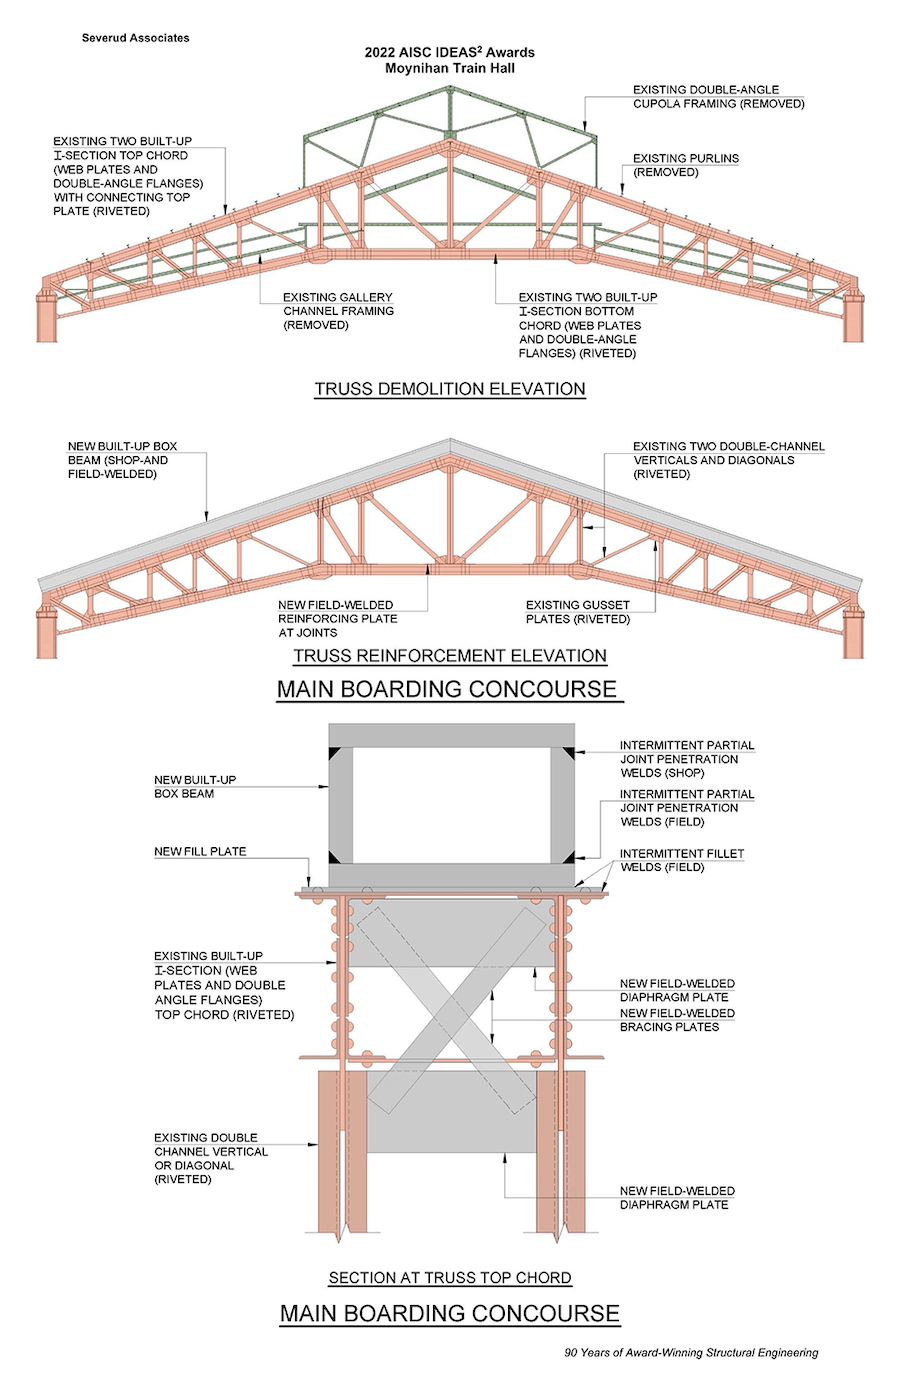 11_moynihan-train-hall---19---main-boarding-concourse---truss-elevations-and-section---drawings-by-severud.jpg